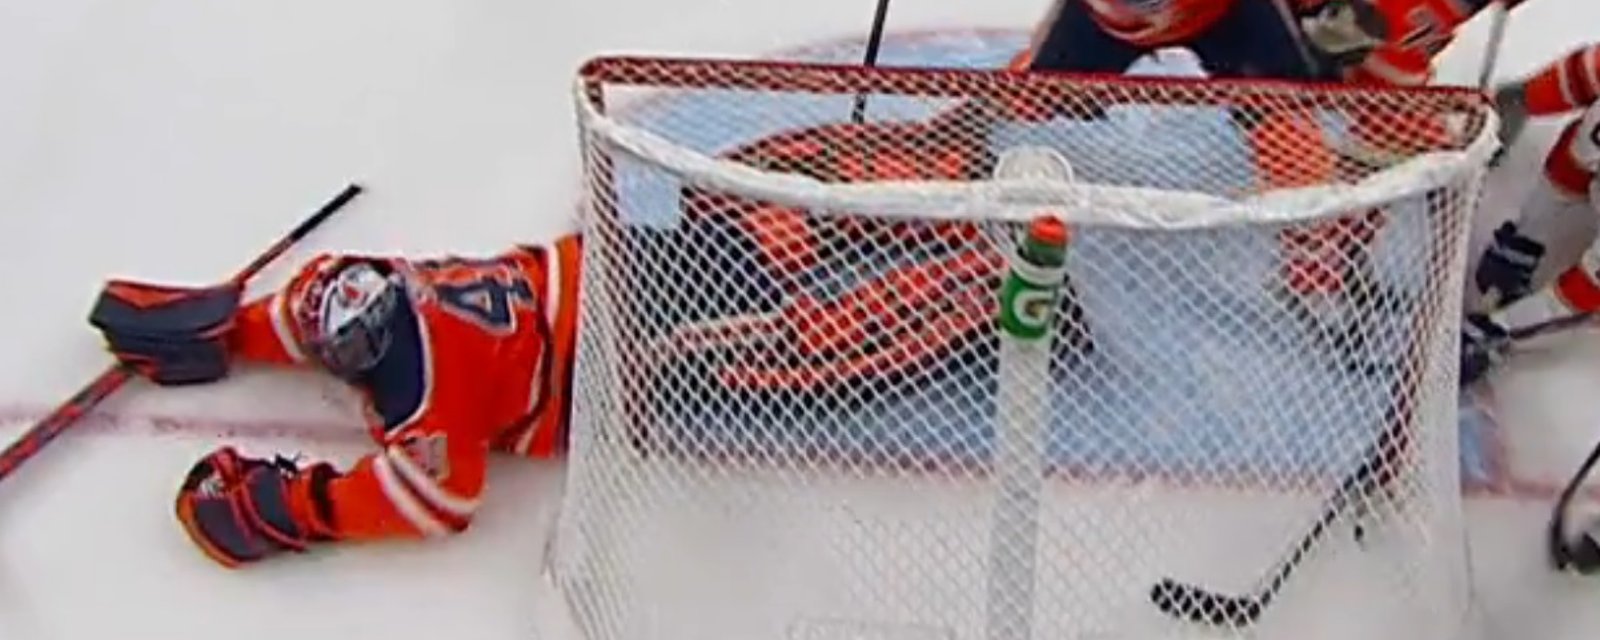 Oilers goalie Mike Smith goes down after a hard shot to his nether region.